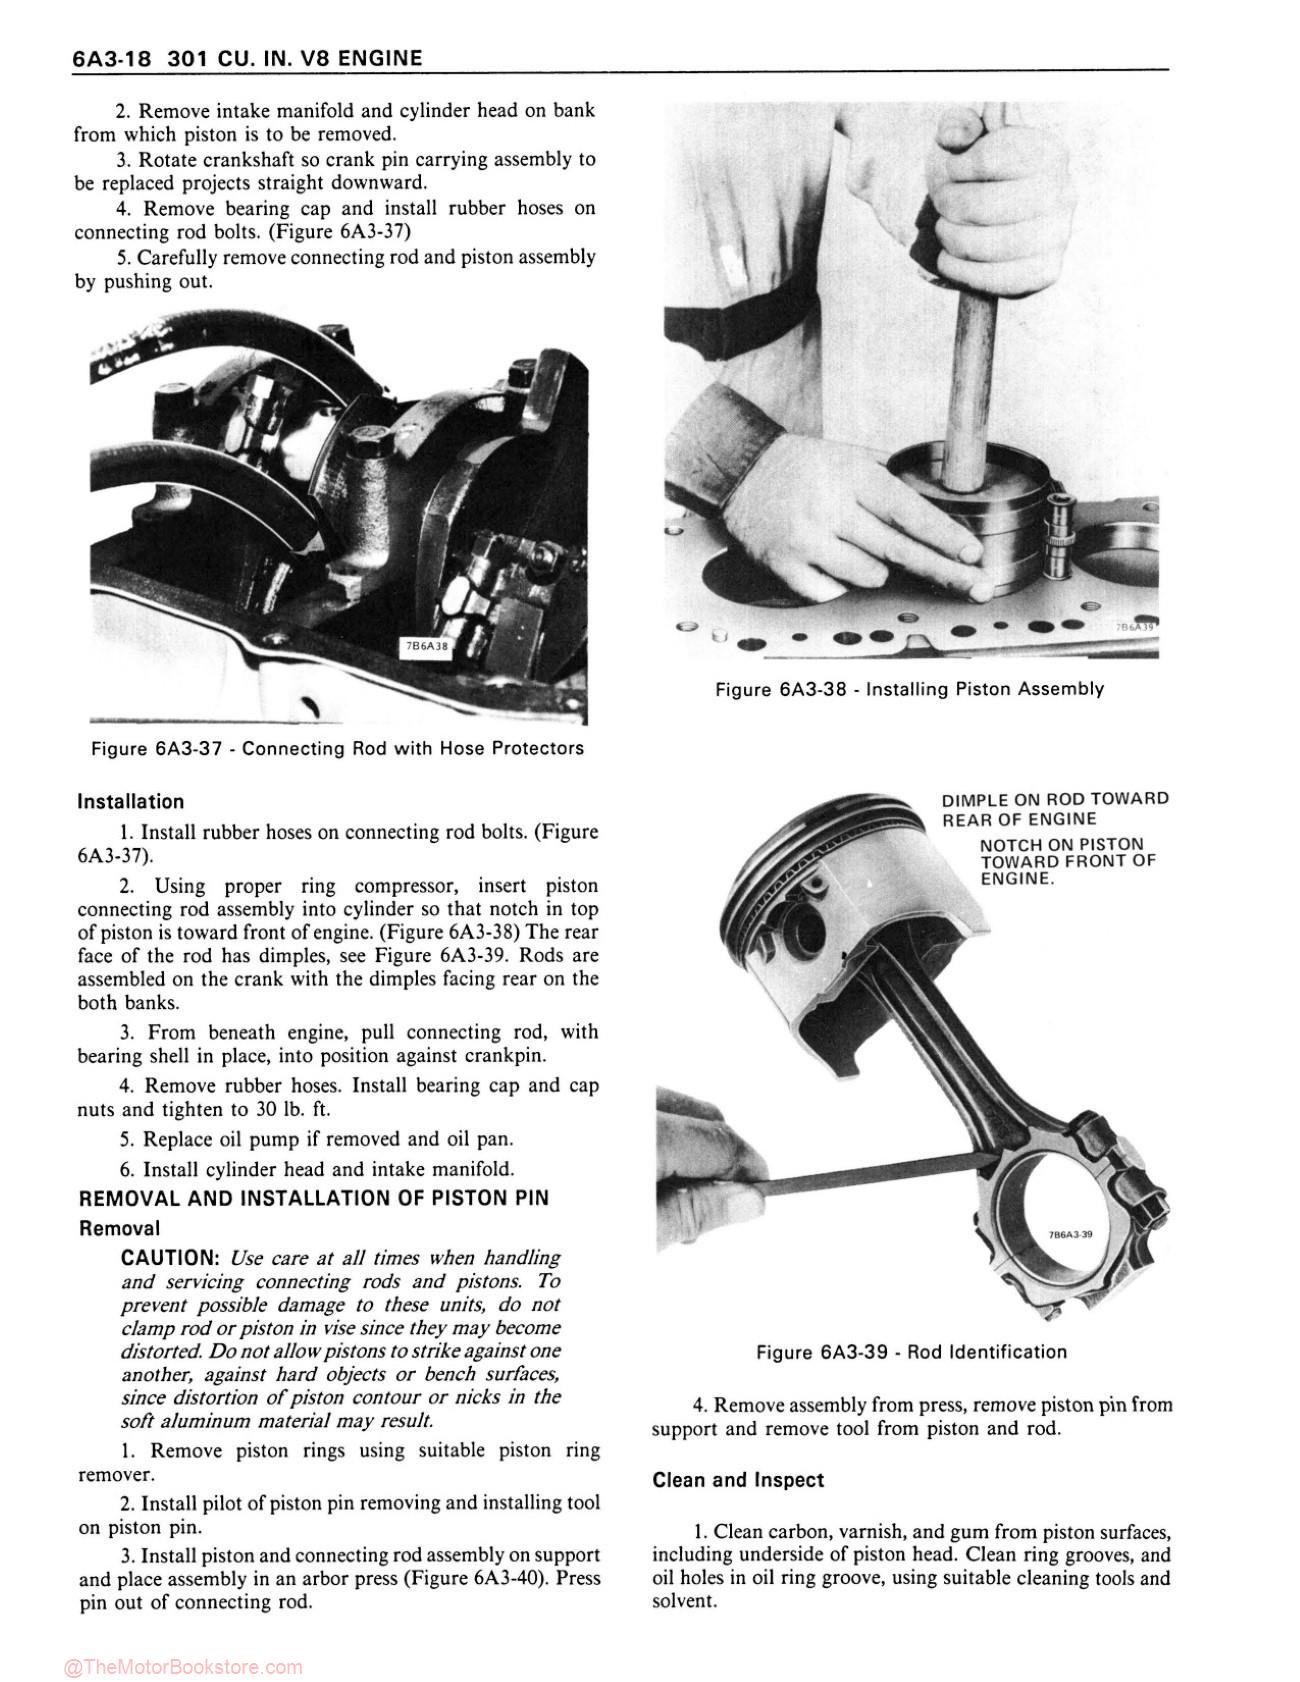 1977 Buick Chassis Service Manual All Series - Sample Page 1